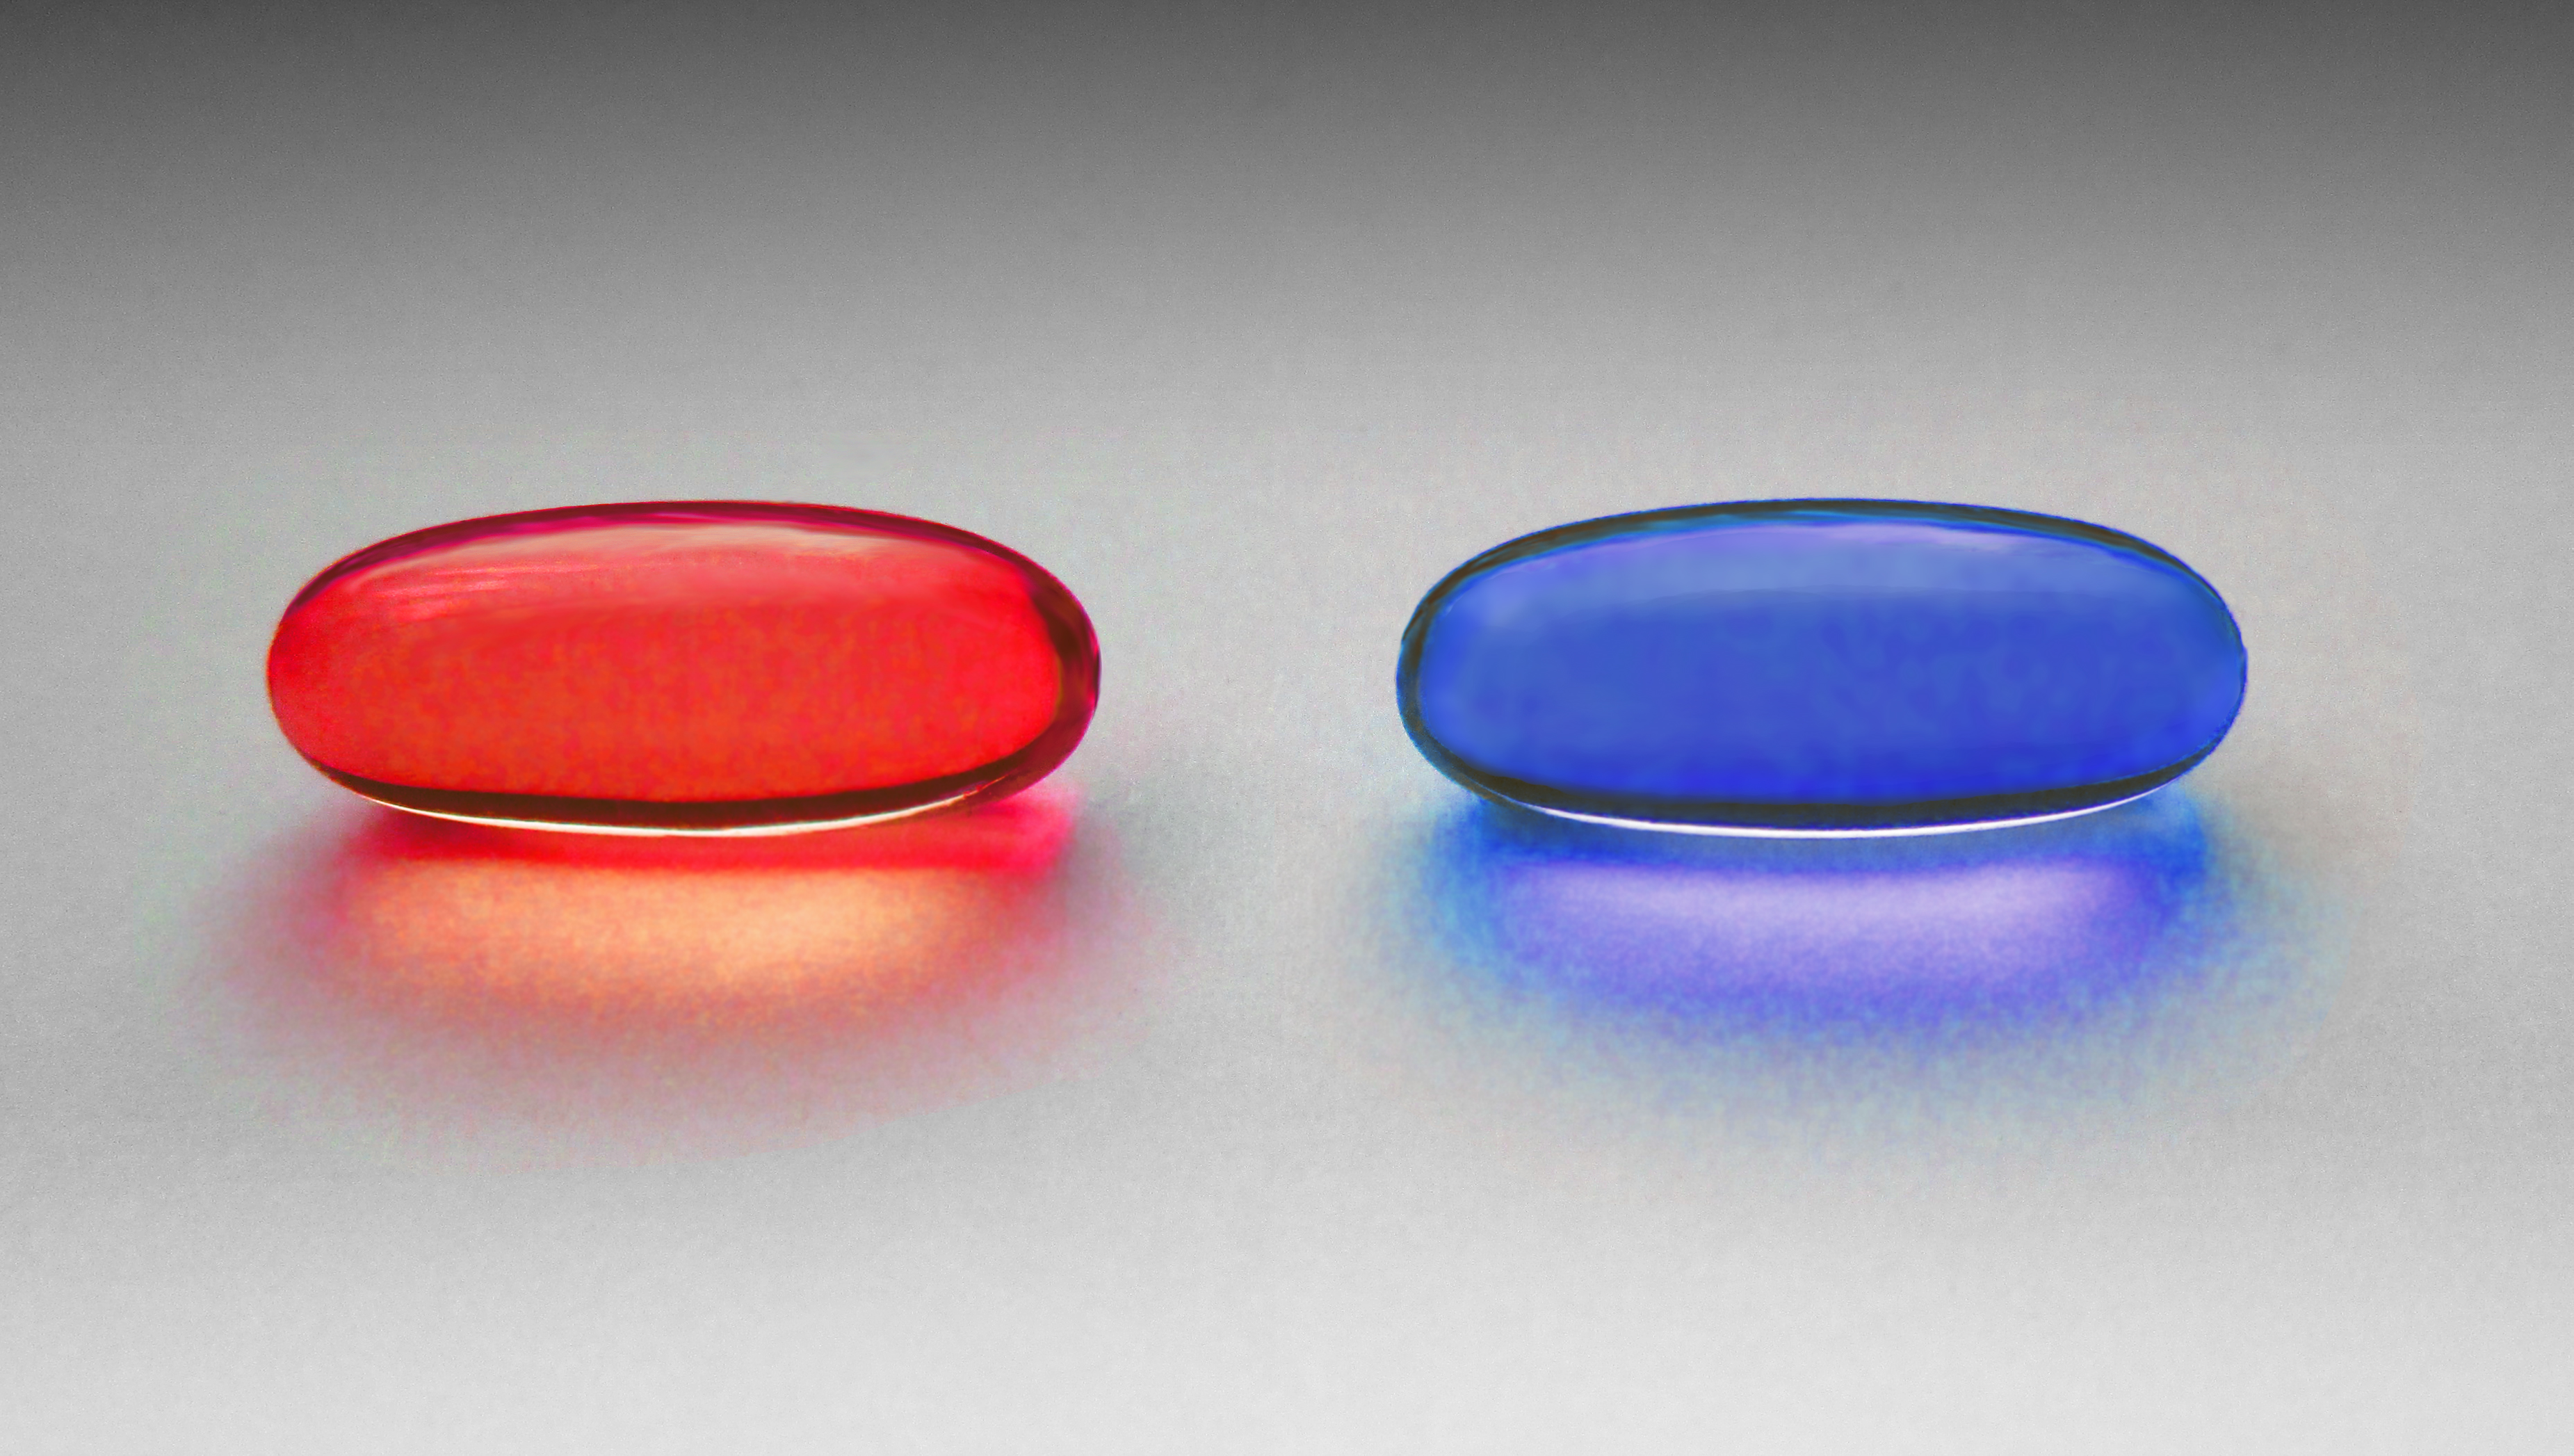 image of a single red and blue pill